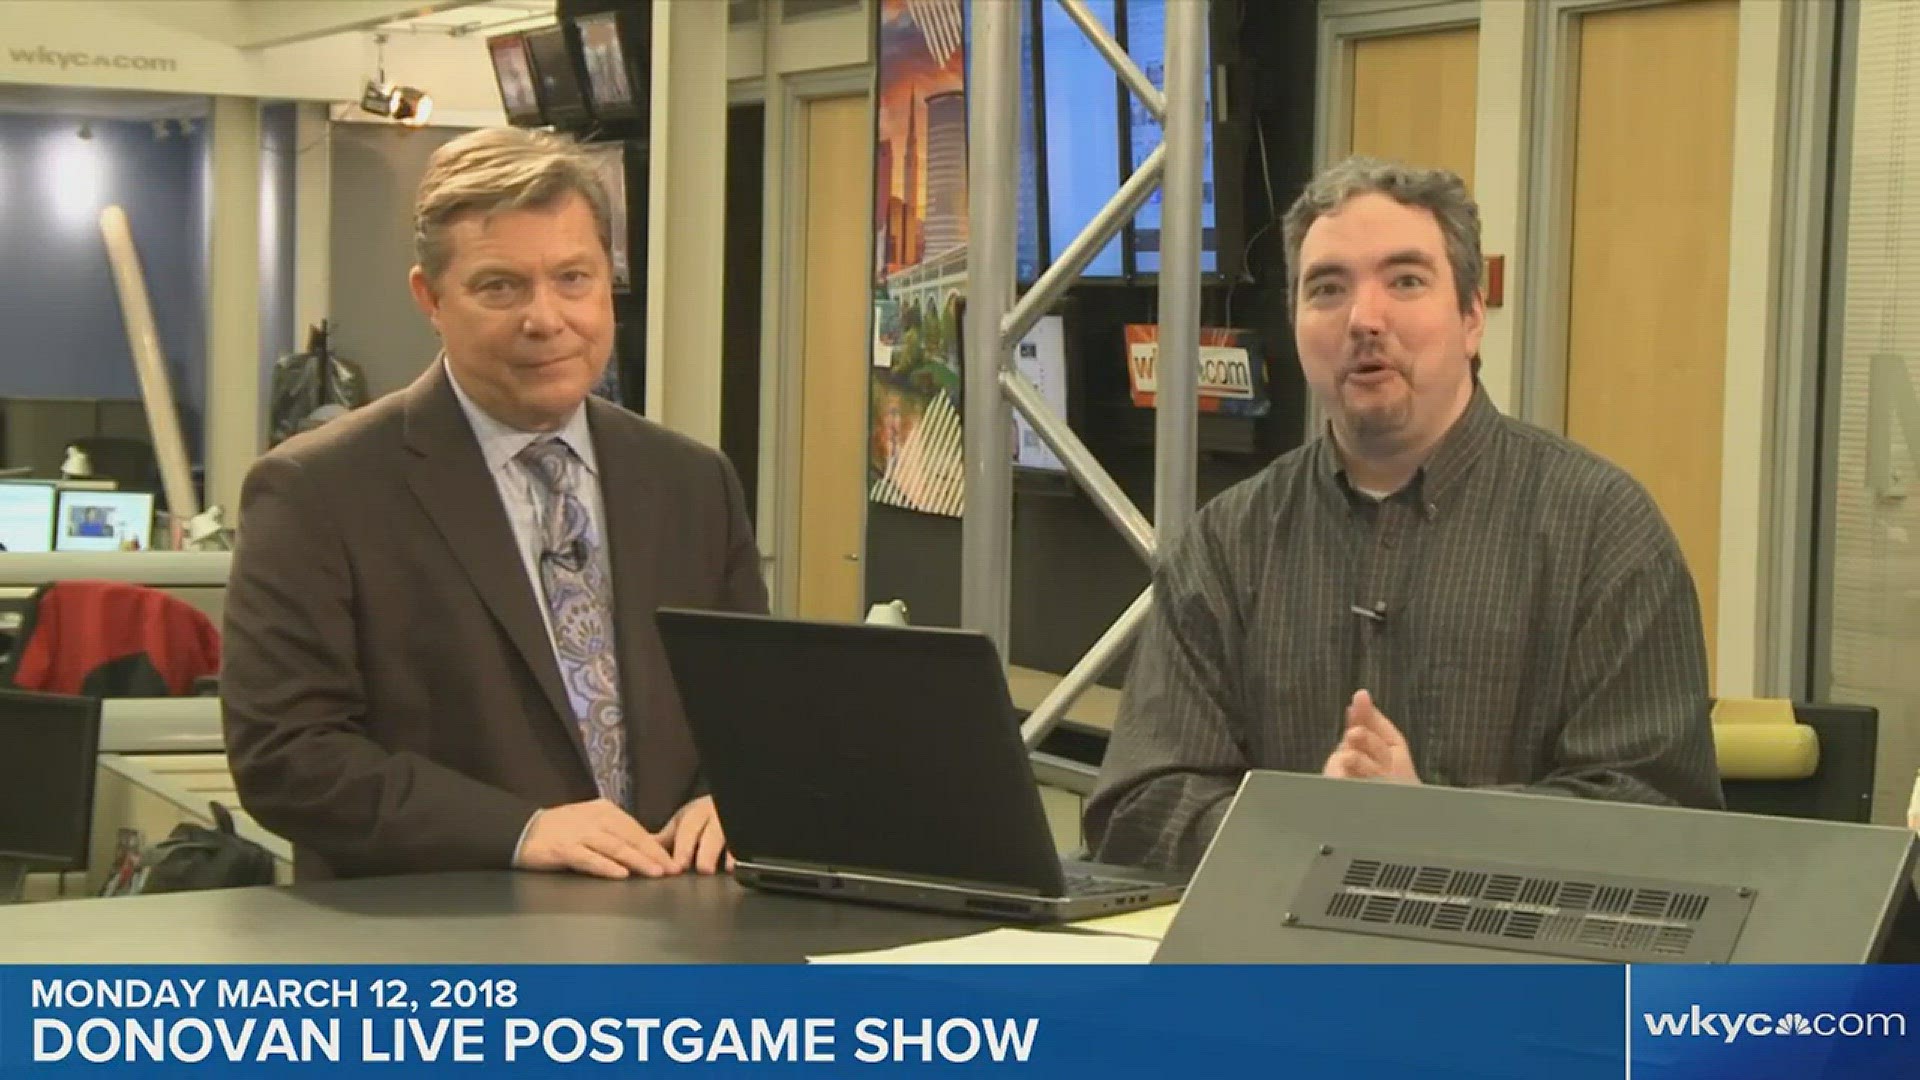 Jimmy reacts to Cleveland Browns weekend moves: Donovan Live Postgame Show